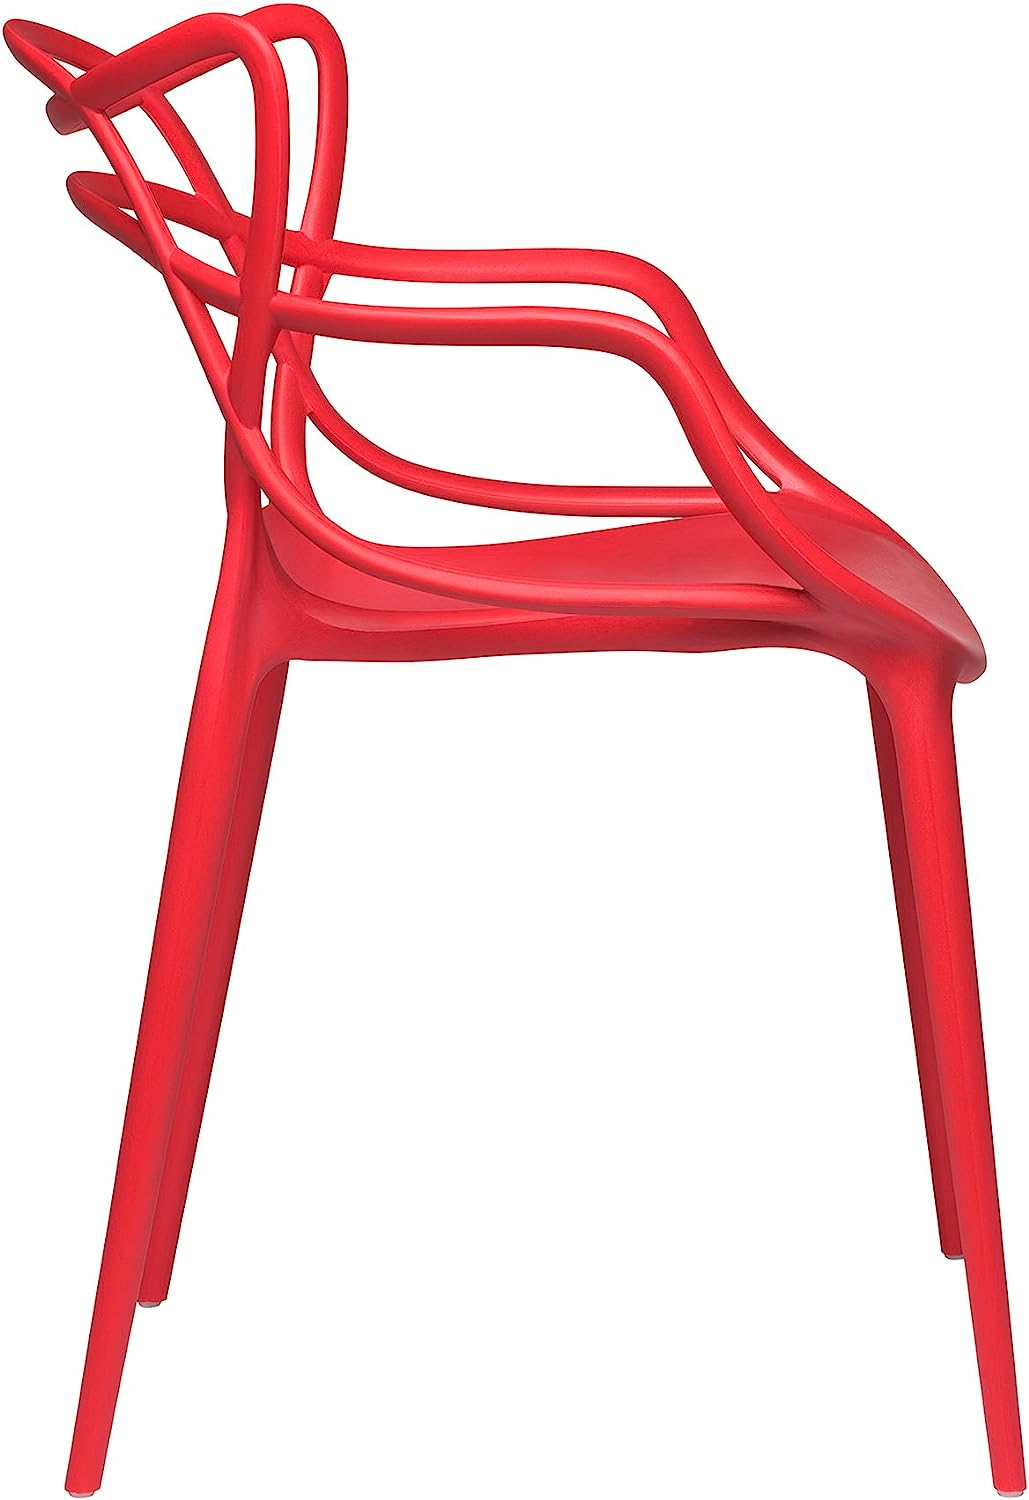 Masters Entangled Dining Chair Replica | HOG furniture.com.ng